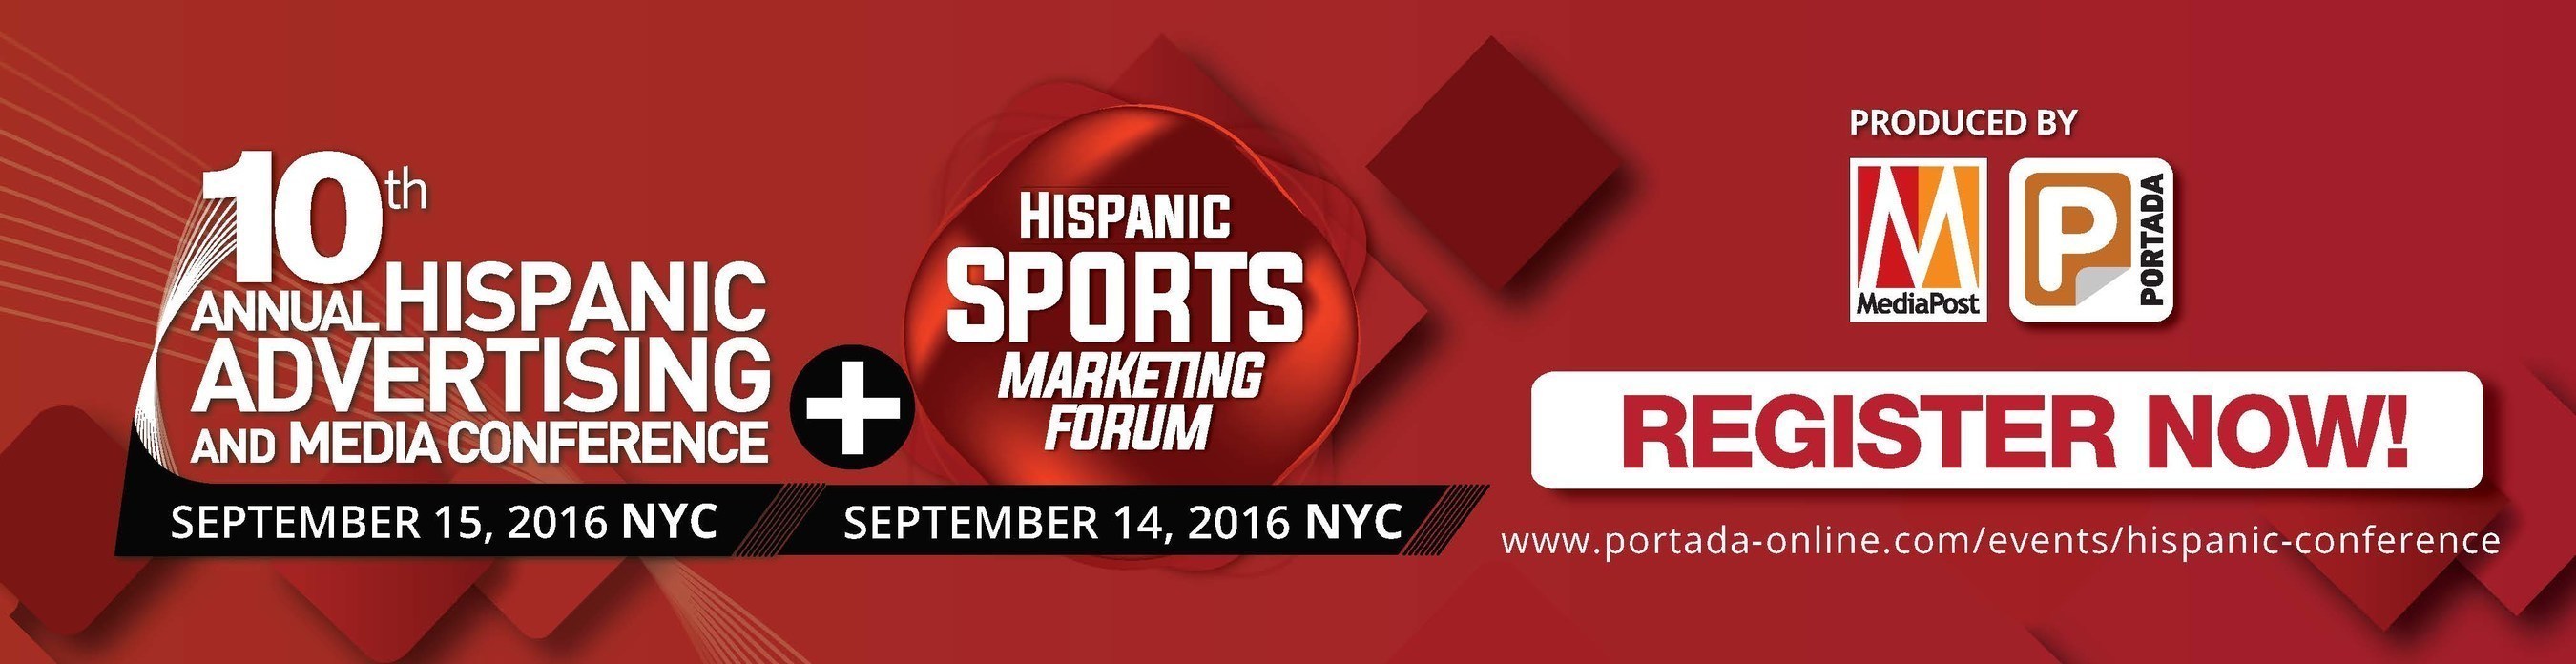 MediaPost and Portada are working together to make an even better 10th Annual Hispanic Advertising and Media Conference (Sept 15) and Hispanic Sports Marketing Forum (Sept. 14)! Both companies will be jointly producing, marketing and programming these major annual events. Benefit from MediaPost's unparalleled penetration in U.S. marketing and media and of Portada's unique positioning in Multicultural marketing. To learn more: https://www.portada-online.com/events/hispanic-conference/